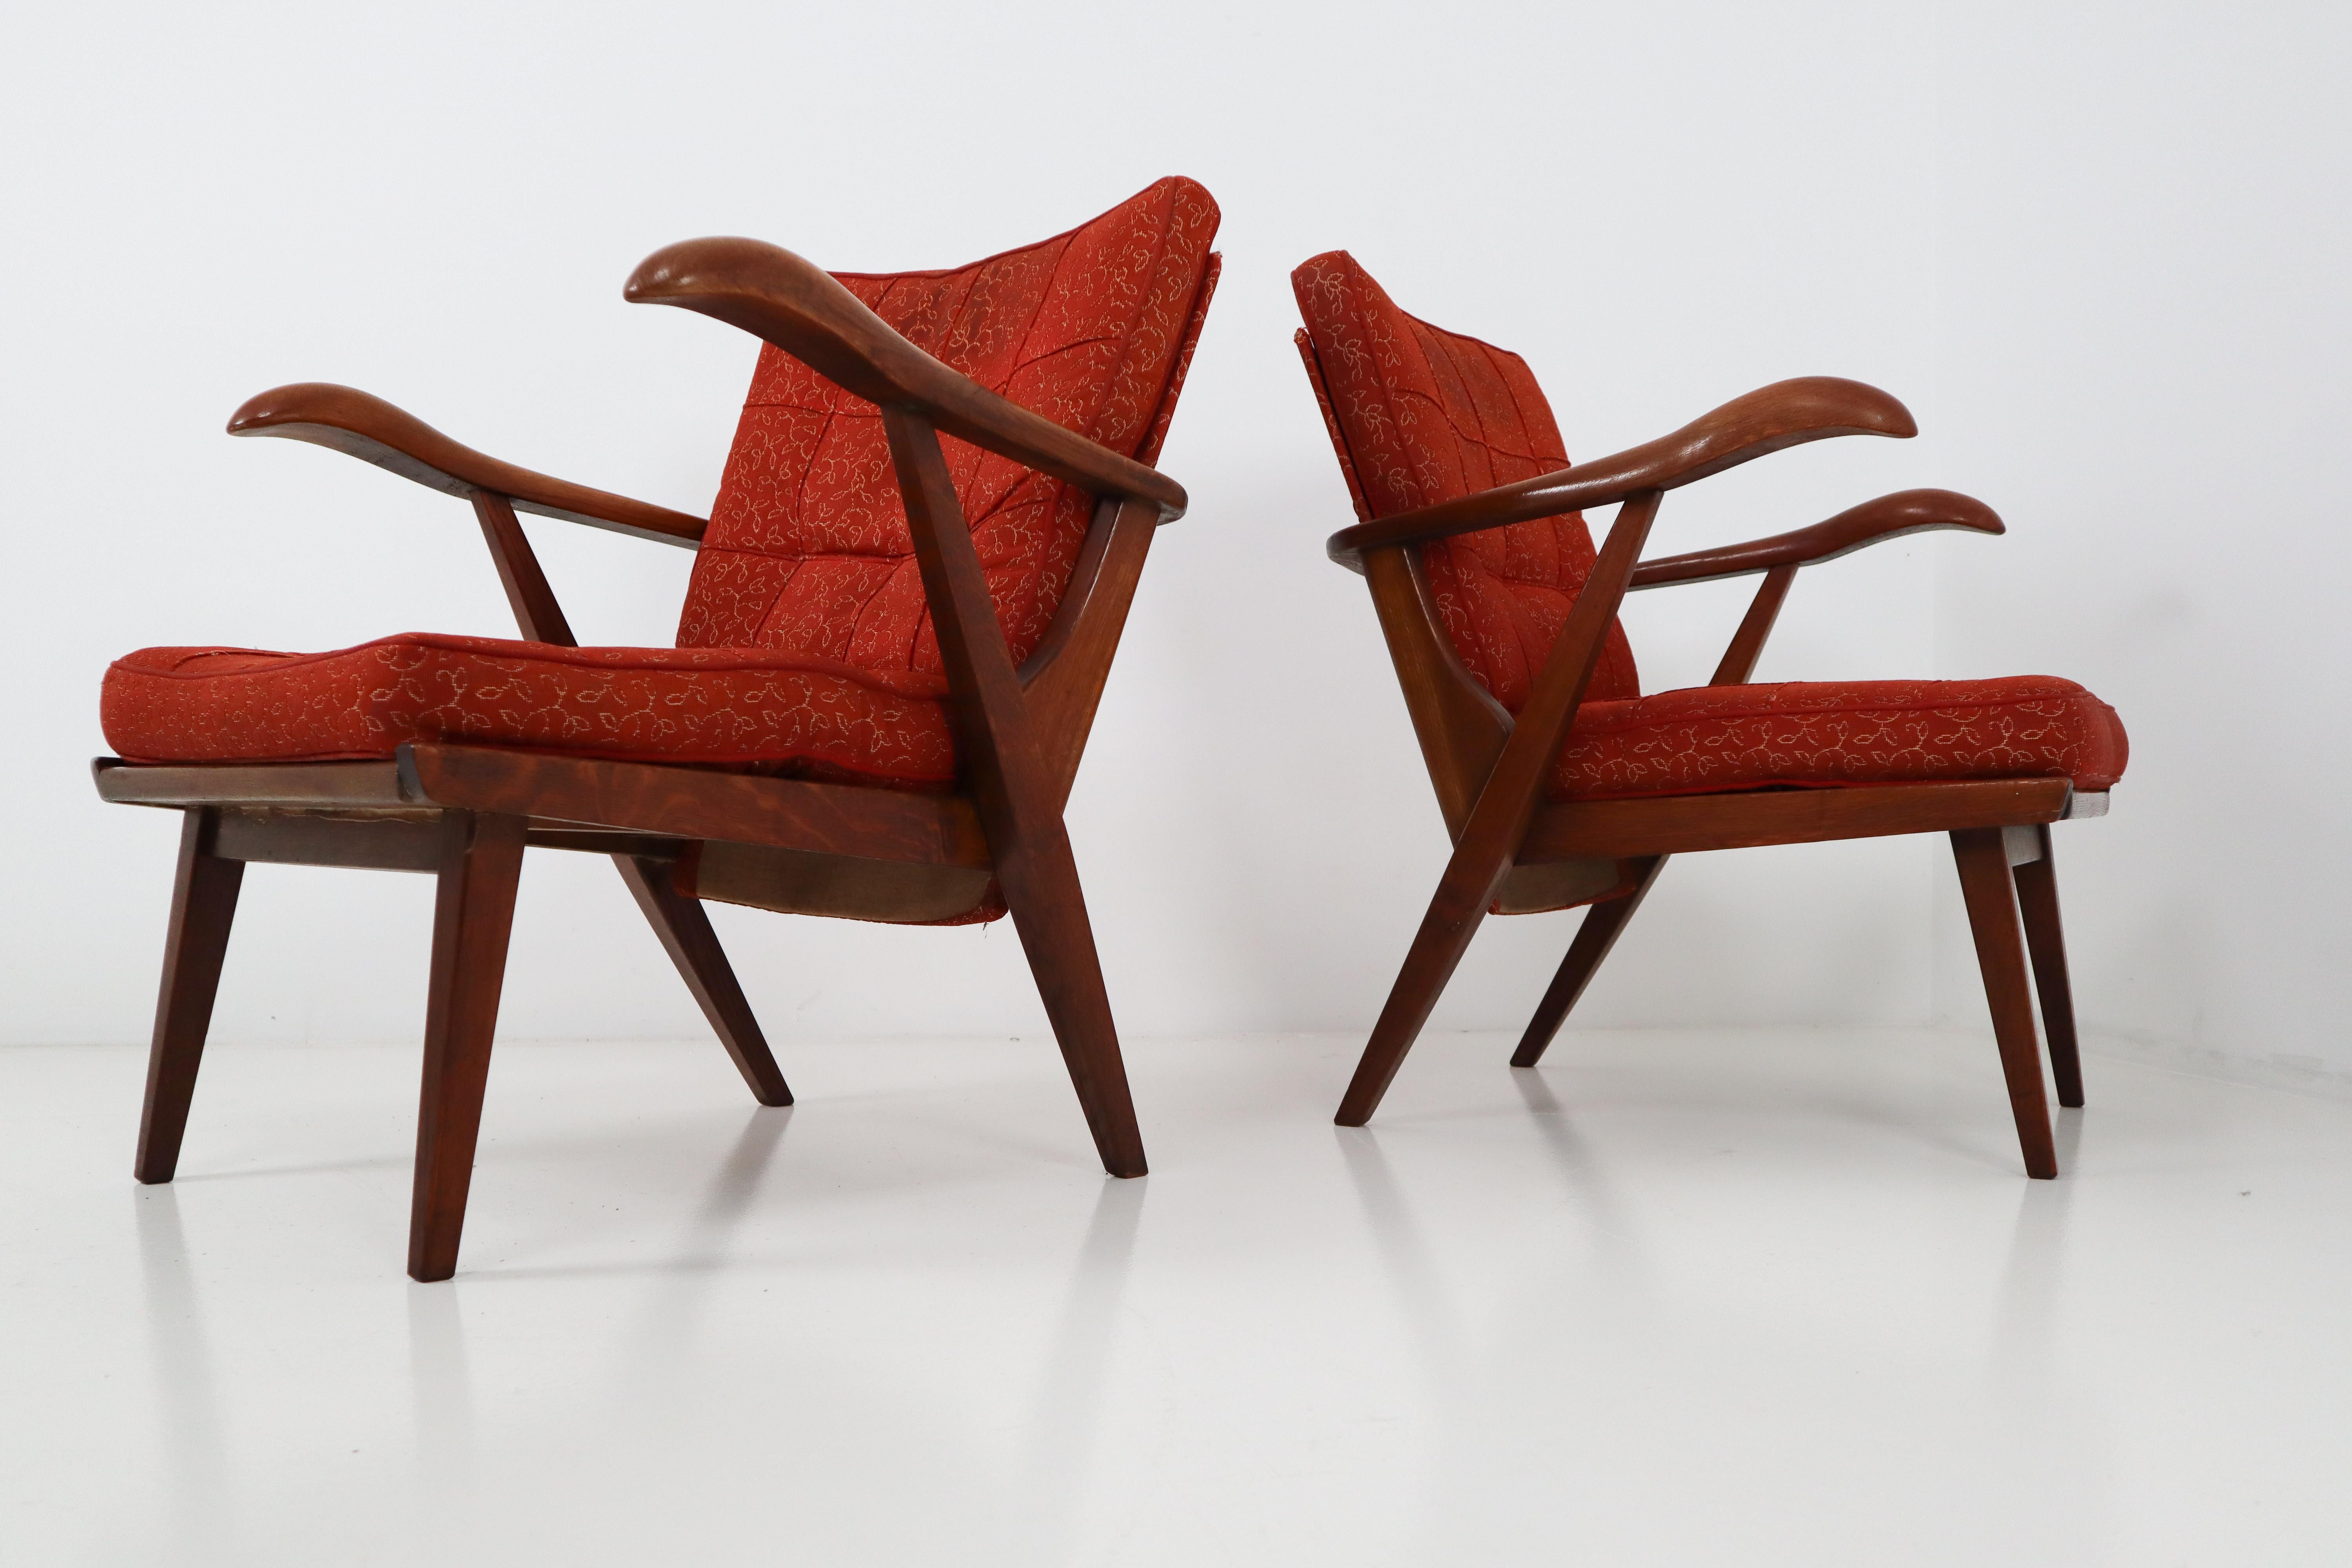 Set of two lounge chairs, in patinated solid oak and red fabric, Czech Republic, 1950s. The grain of the stained wood is nicely visible, especially on the wide sculpted armrests. Amazing original patina. These chairs are upholstered in original red